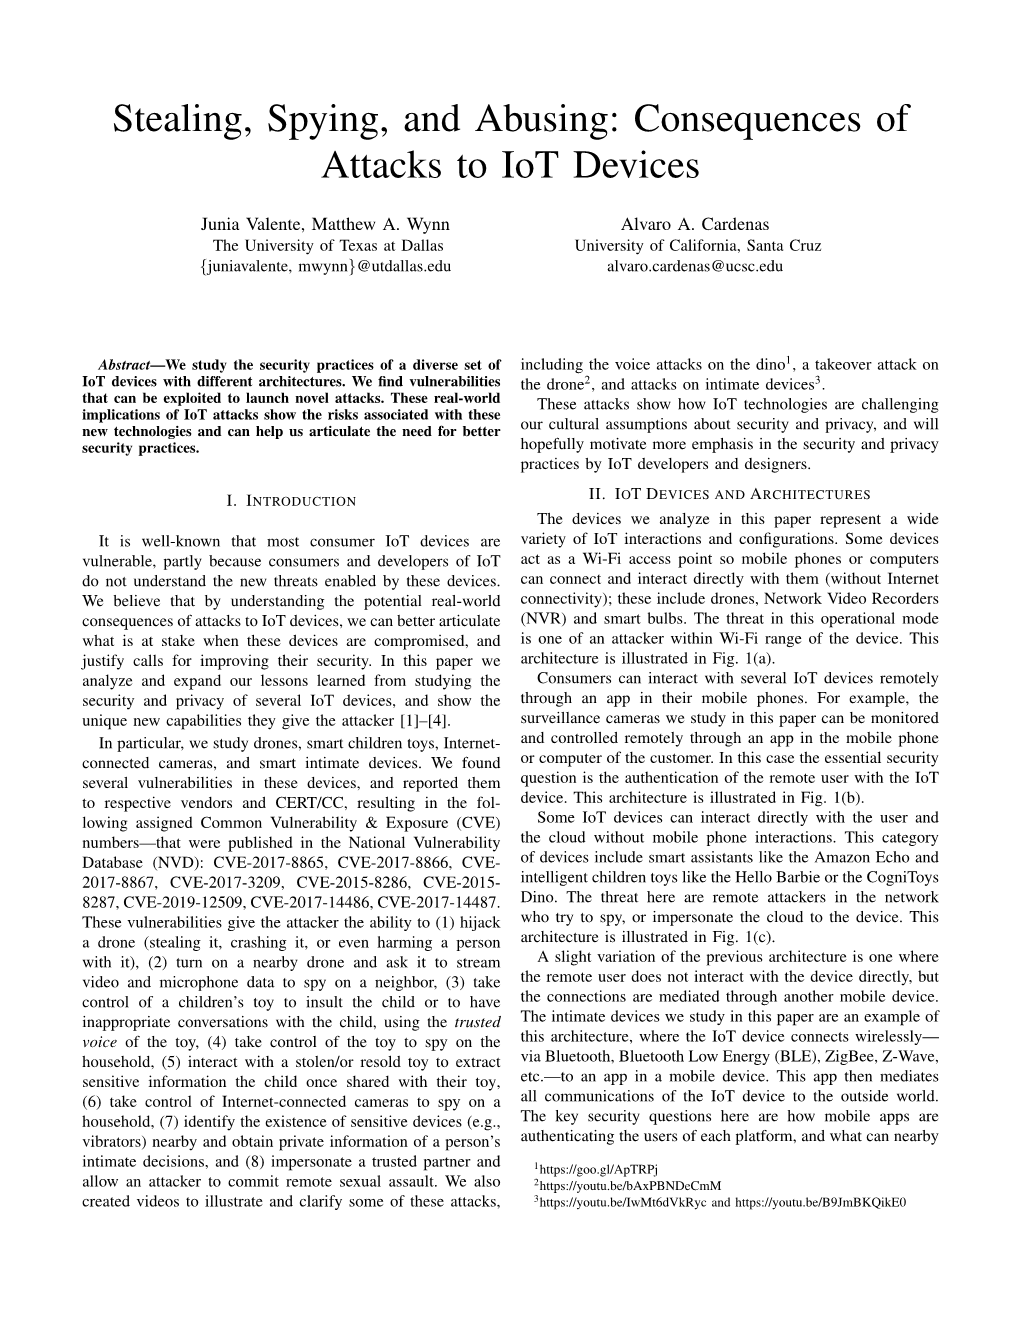 Stealing, Spying, and Abusing: Consequences of Attacks to Iot Devices